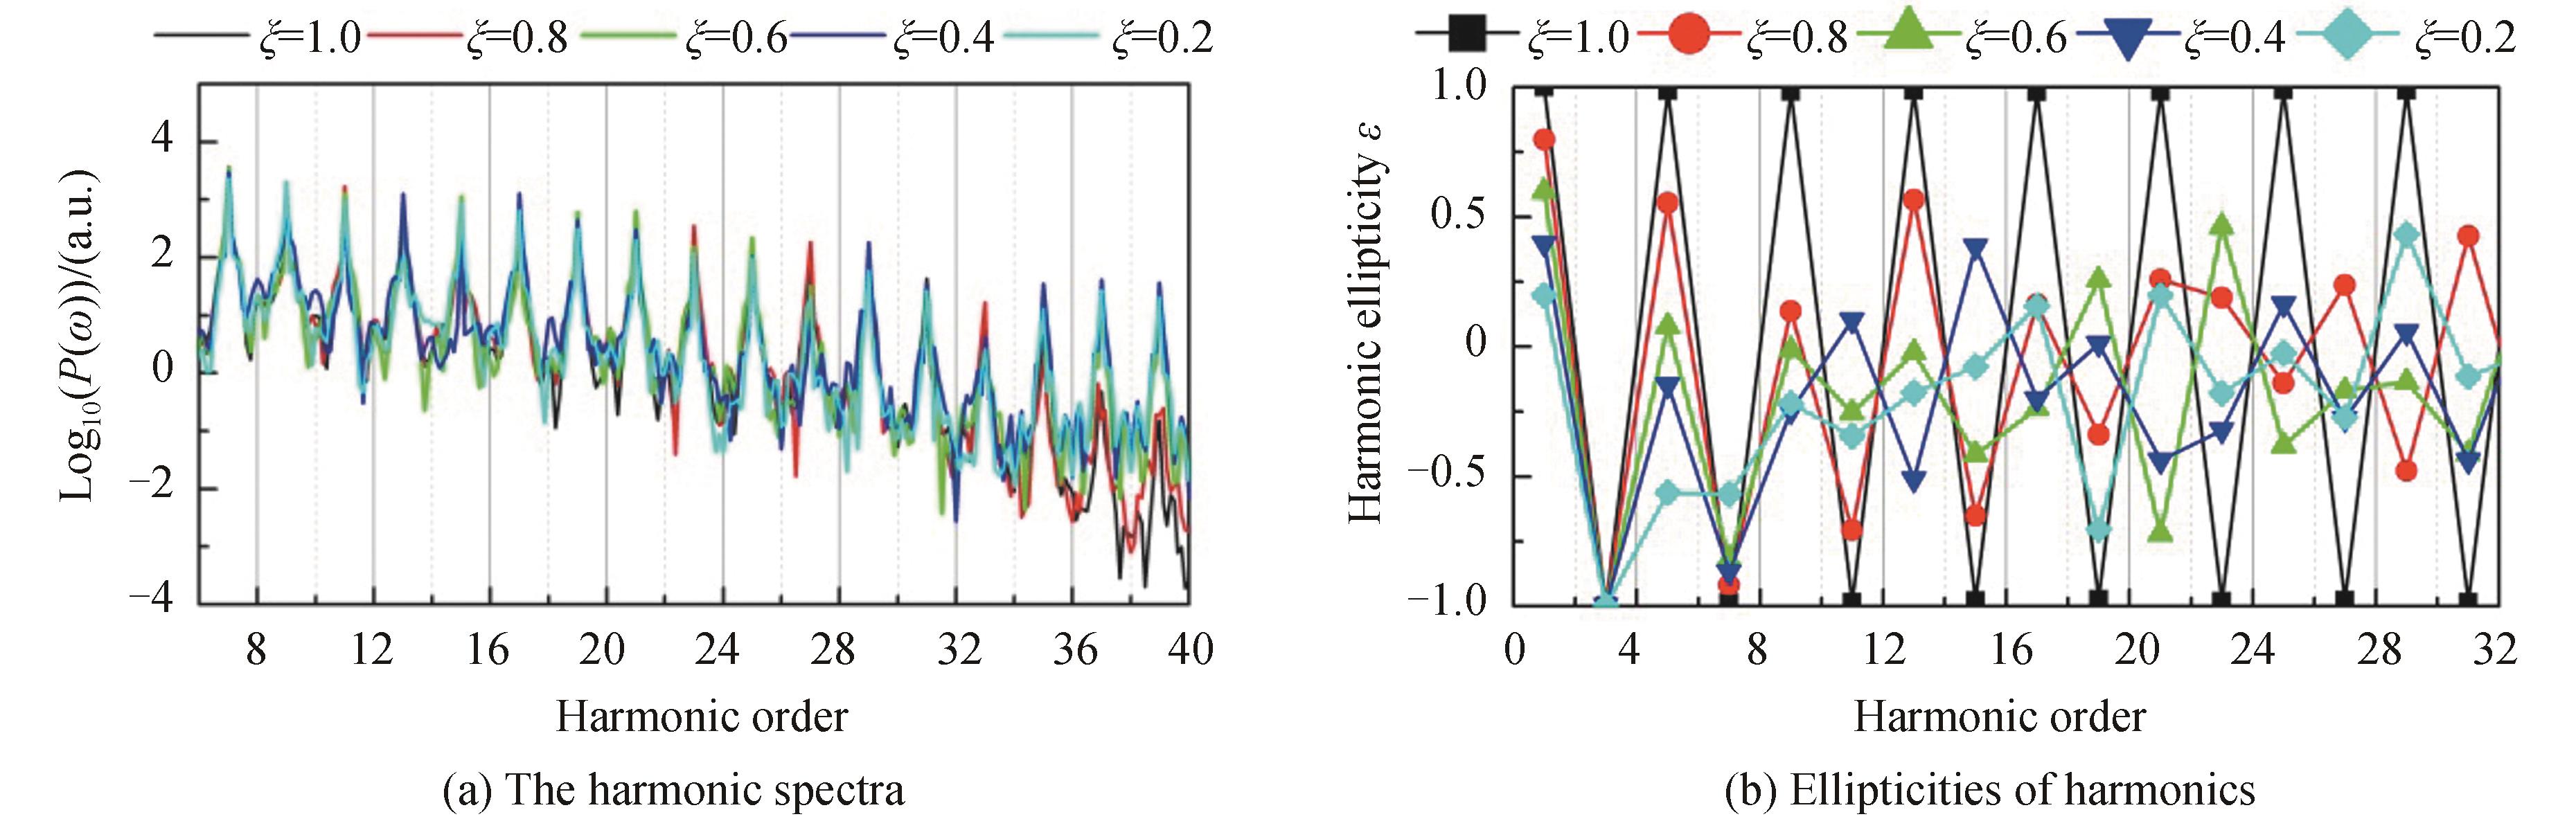 The harmonics generated from He driven by two-color driving pulse with different ξ for fundamental pulse